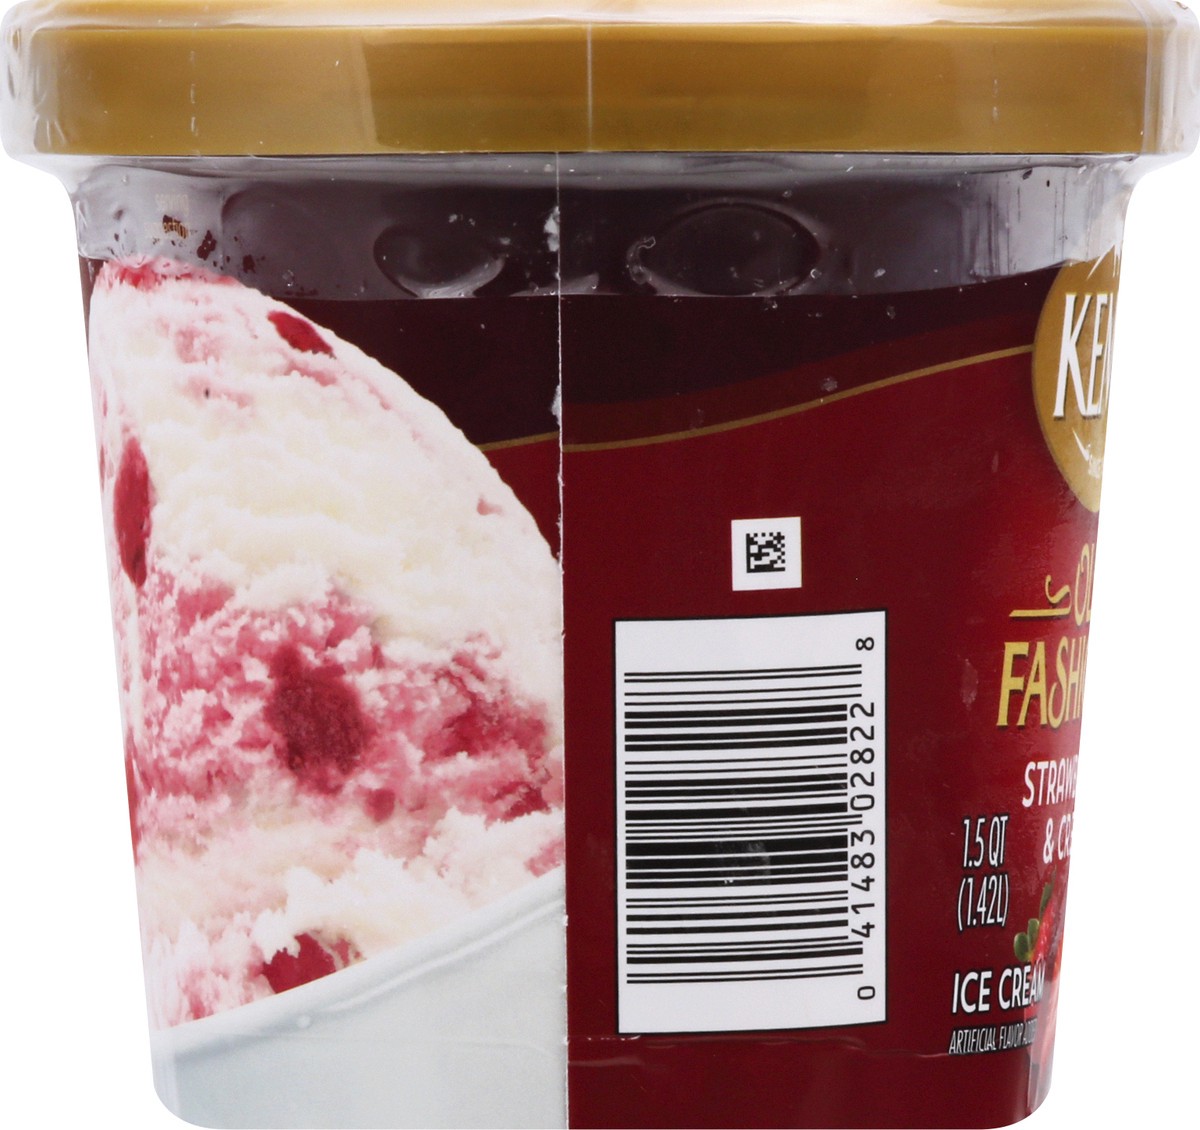 slide 8 of 9, Kemps Strwberry Cream Old Fashioned Ice Cream, 1.5 qt